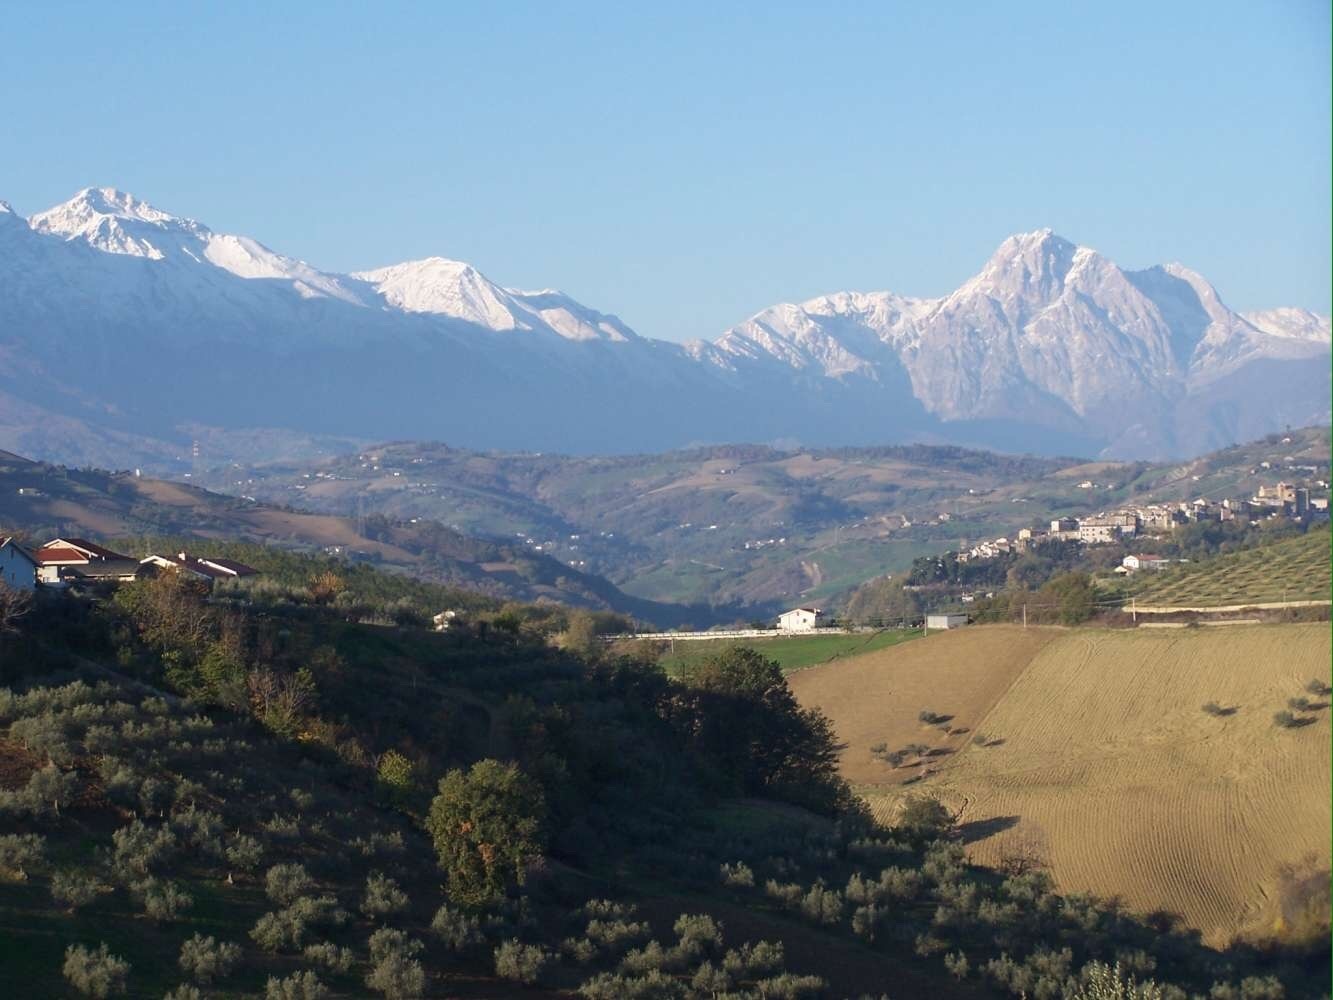 Mountains of Abruzzo Italy. View from our house.
http://sleland.weebly.com/blogs/a-is-for-abruzzo